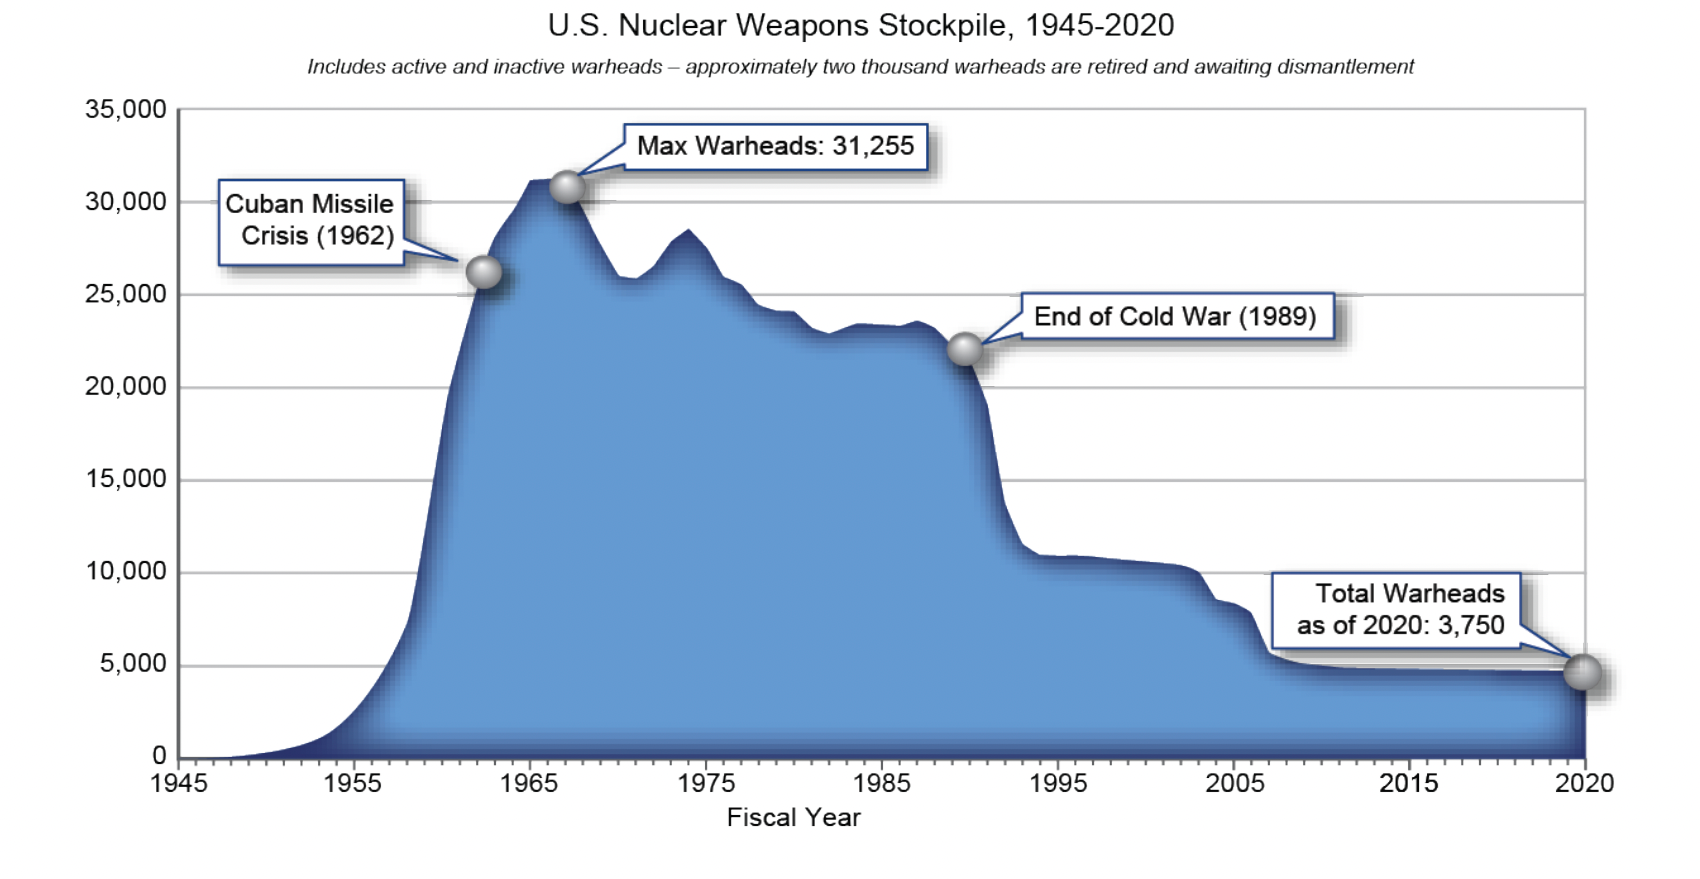 message-editor%2F1633628385101-nuclear_weapons_stockpile.png